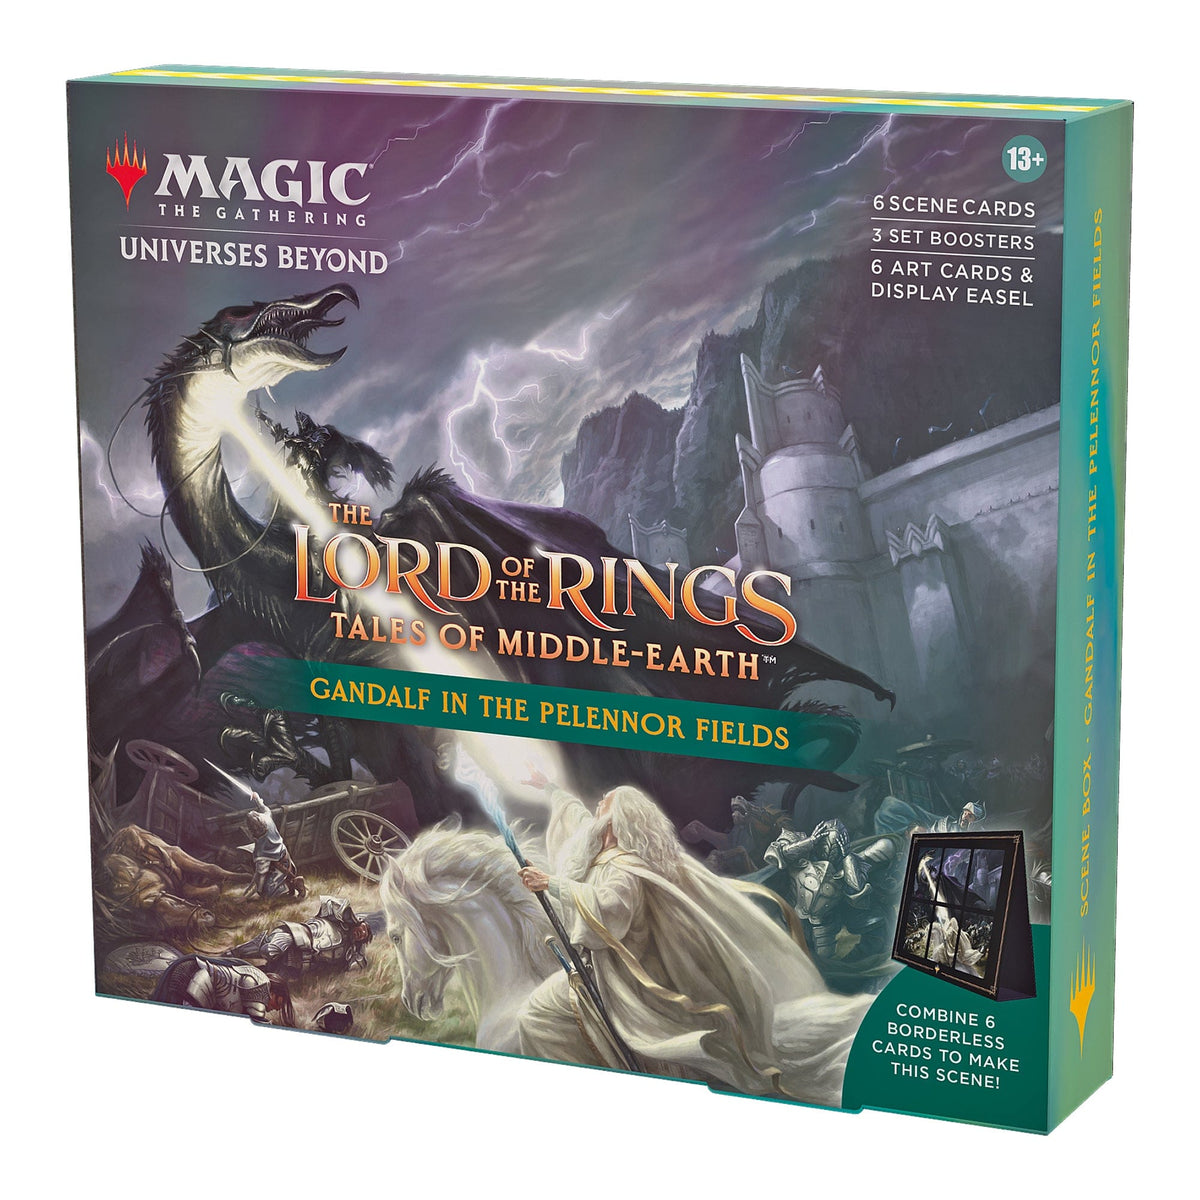 Magic the Gathering CCG: The Lord of the Rings - Tales of Middle-earth Scene Box - Gandalf in the Pelennor Fields